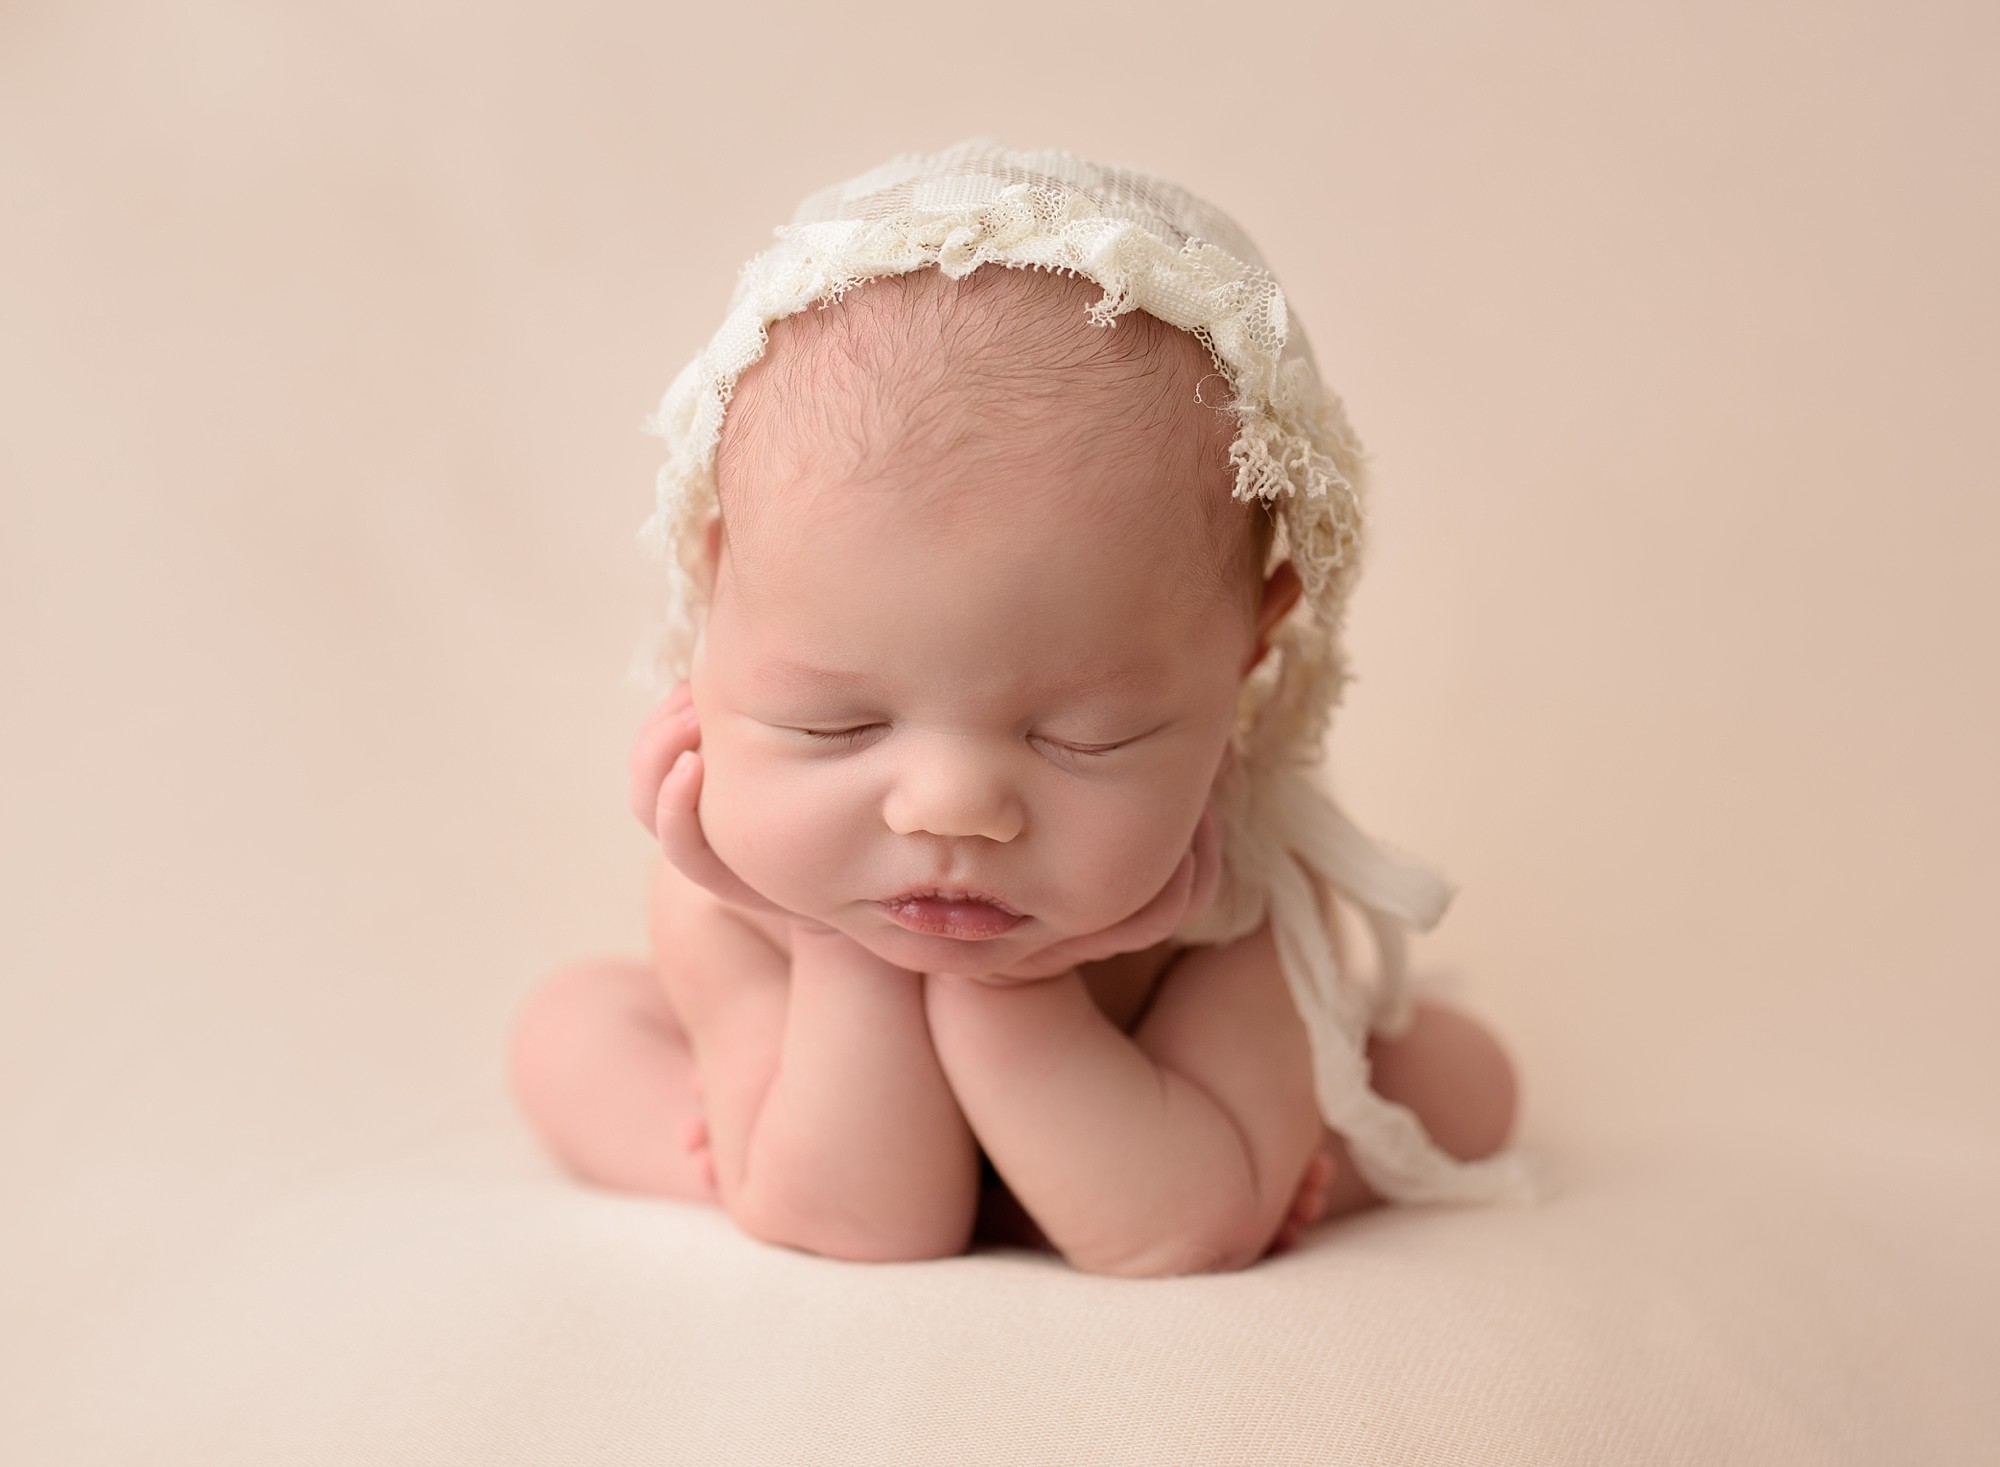 newborn baby from quispamsis on blush pink and wearing a lacy bonnet